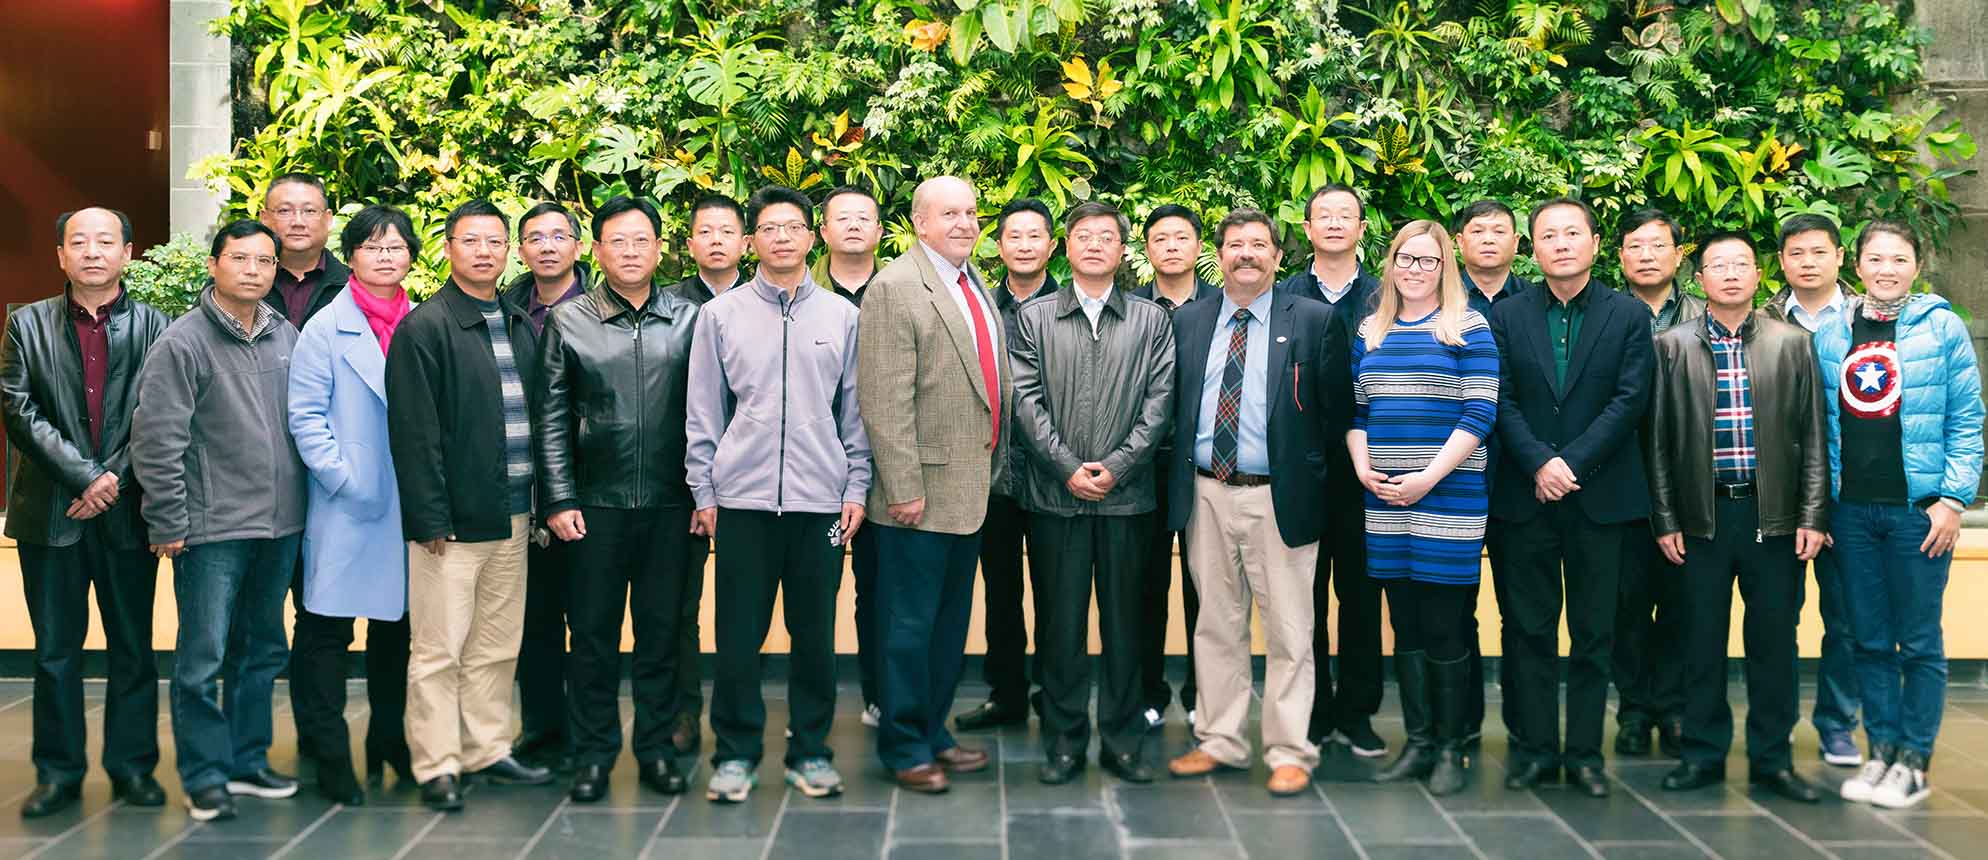 The entire Chinese delegation poses in front of the plant wall